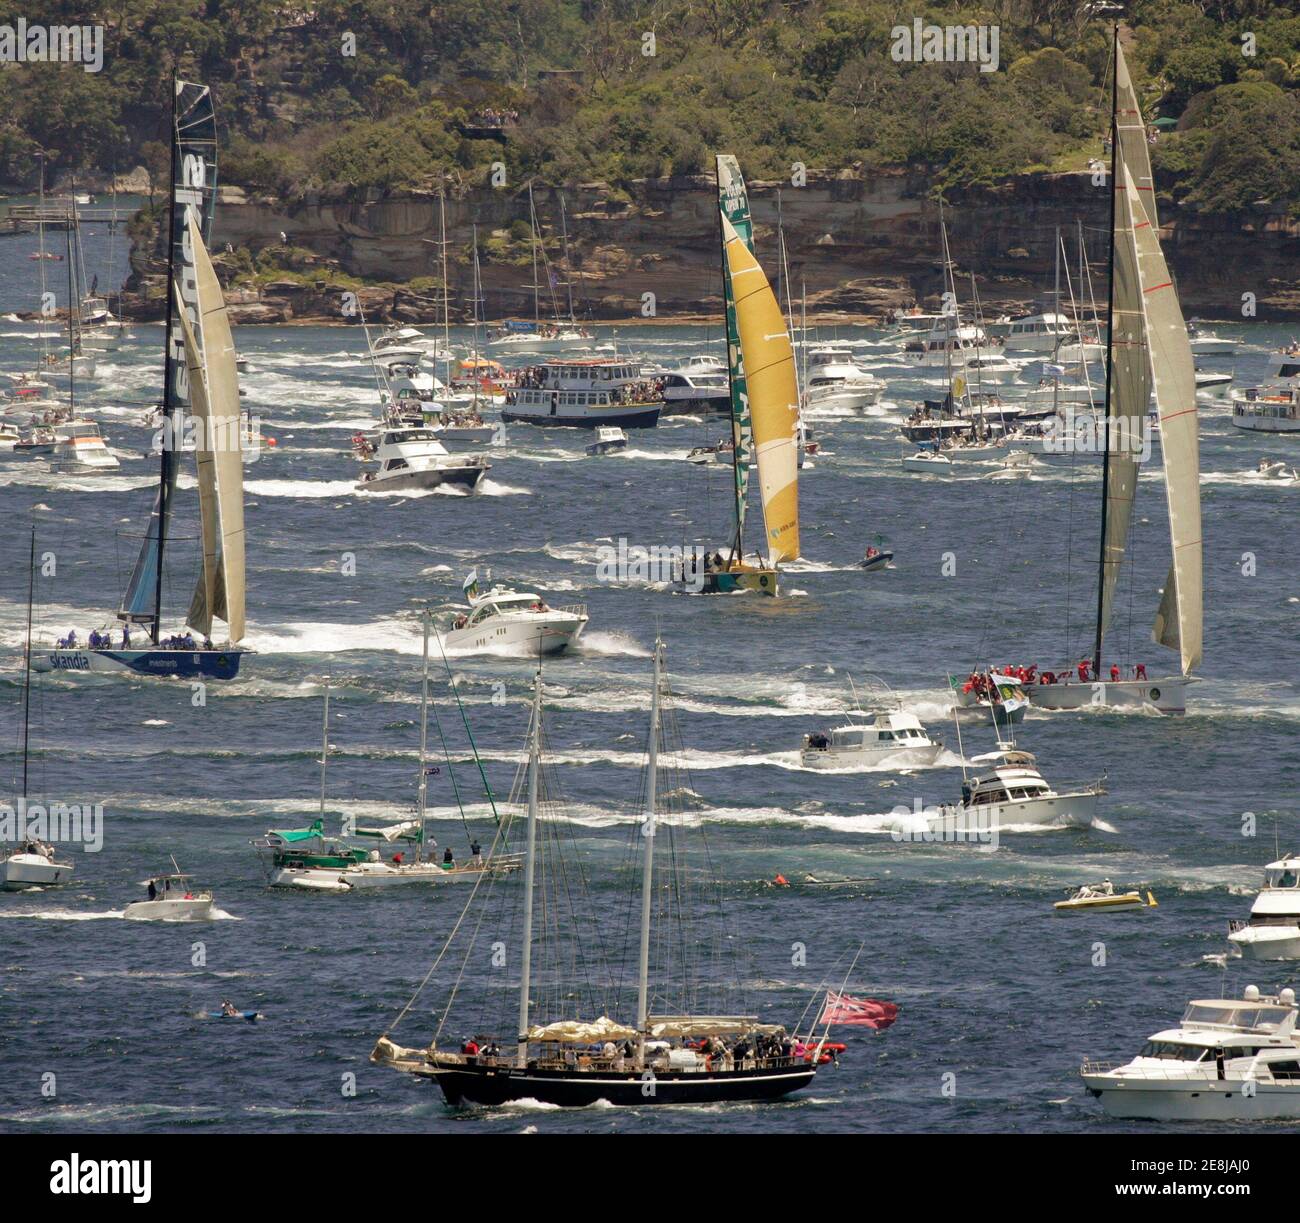 Wild Oats XI (R) leads Skandia (L) and ABN AMRO (C) as they negotiate part of the spectator fleet after the start of the annual Sydney to Hobart yacht race in Sydney December 26, 2006. REUTERS/Will Burgess (AUSTRALIA) Stock Photo